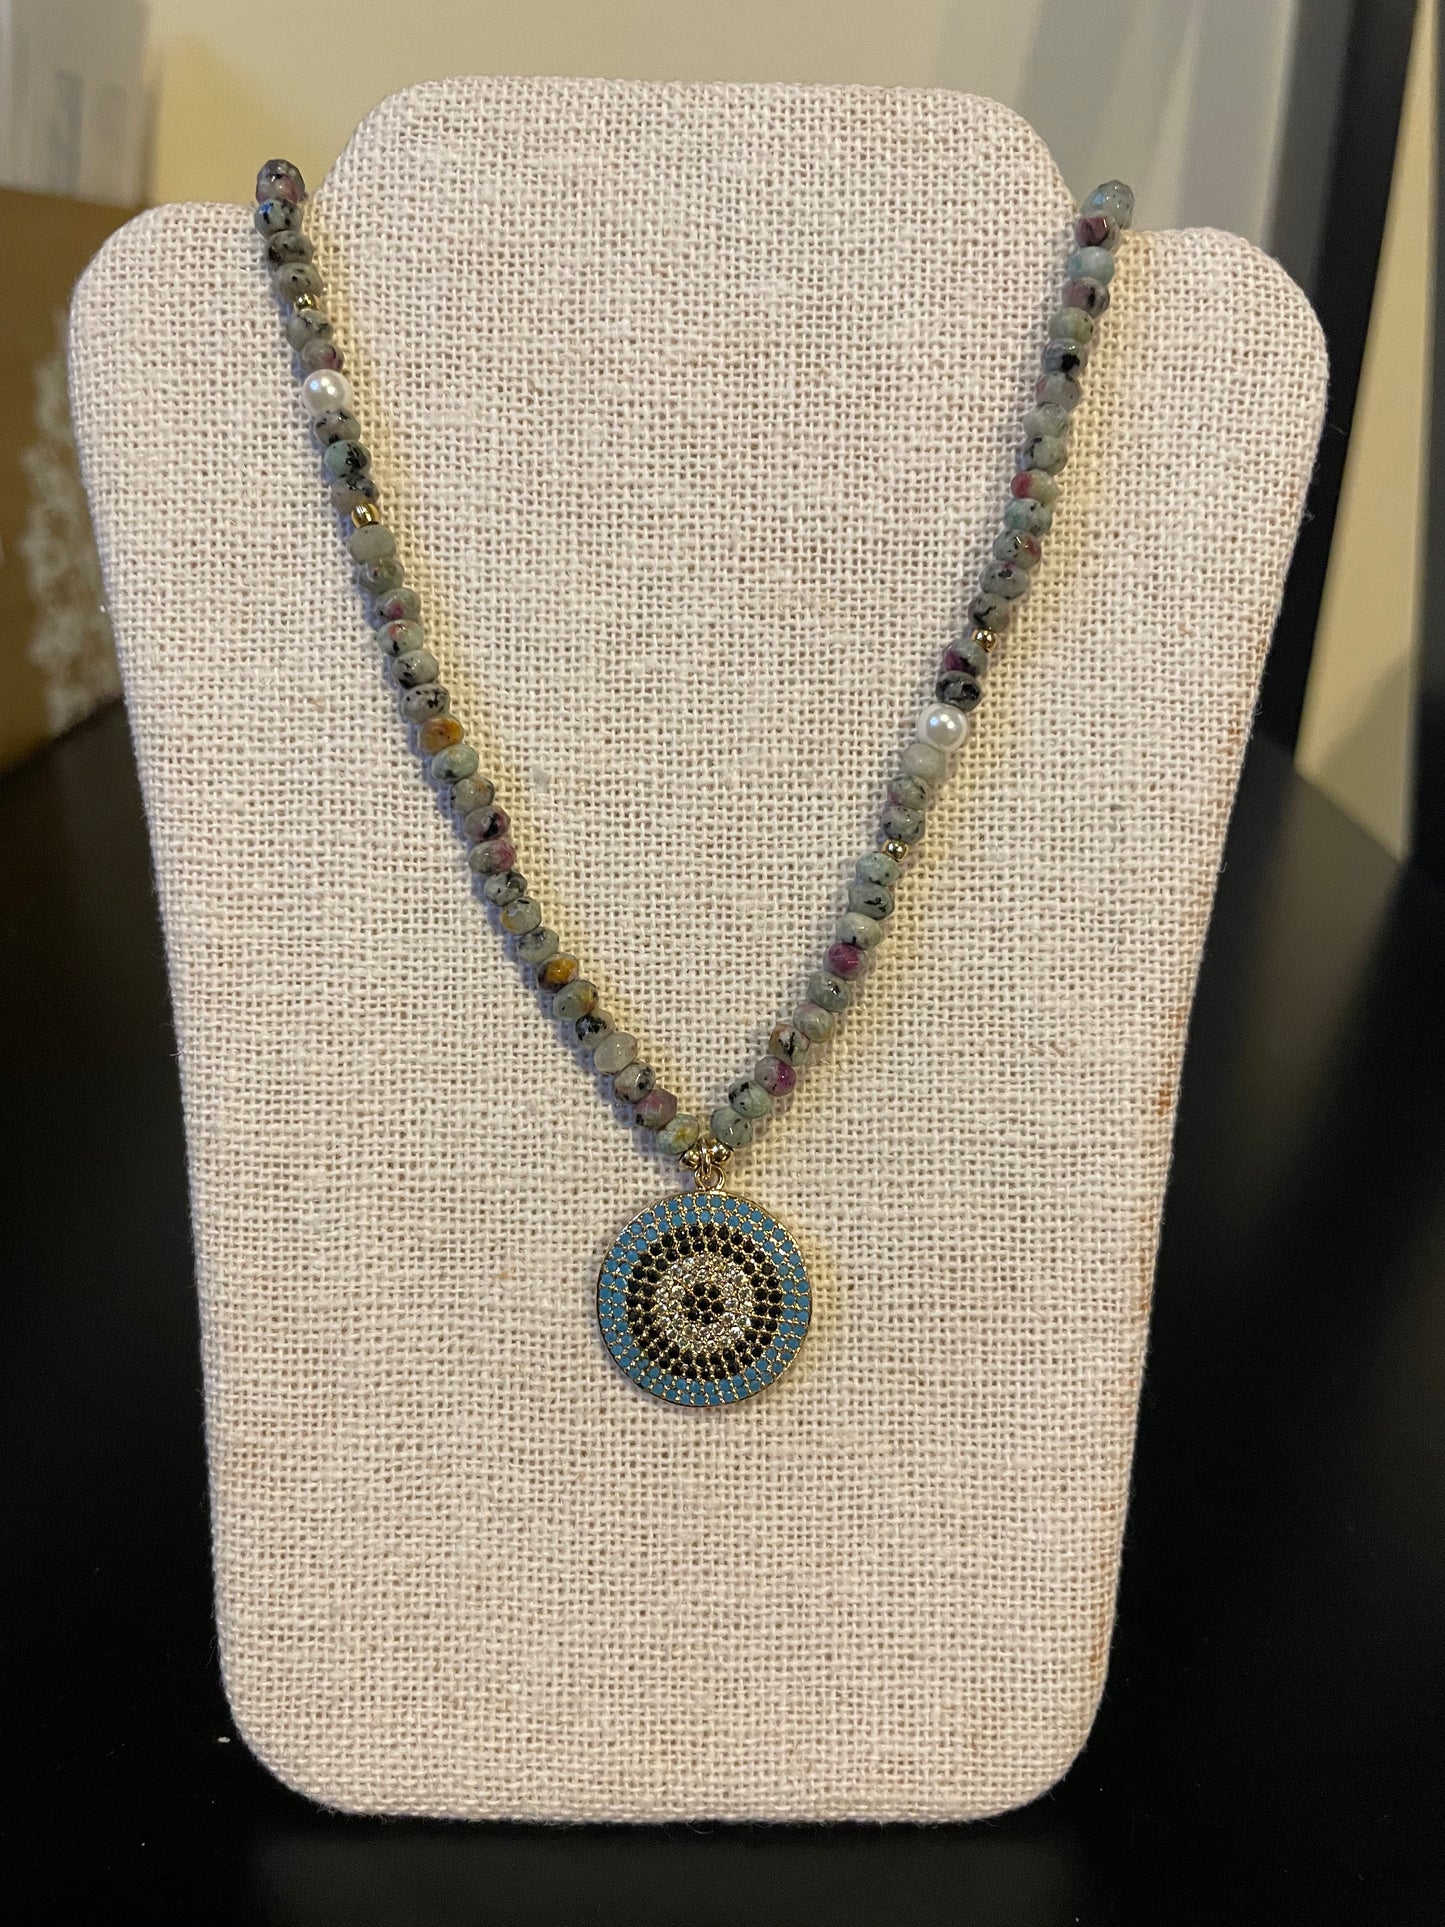 Nakamol- Necklace / Multicolor Beads with Circle